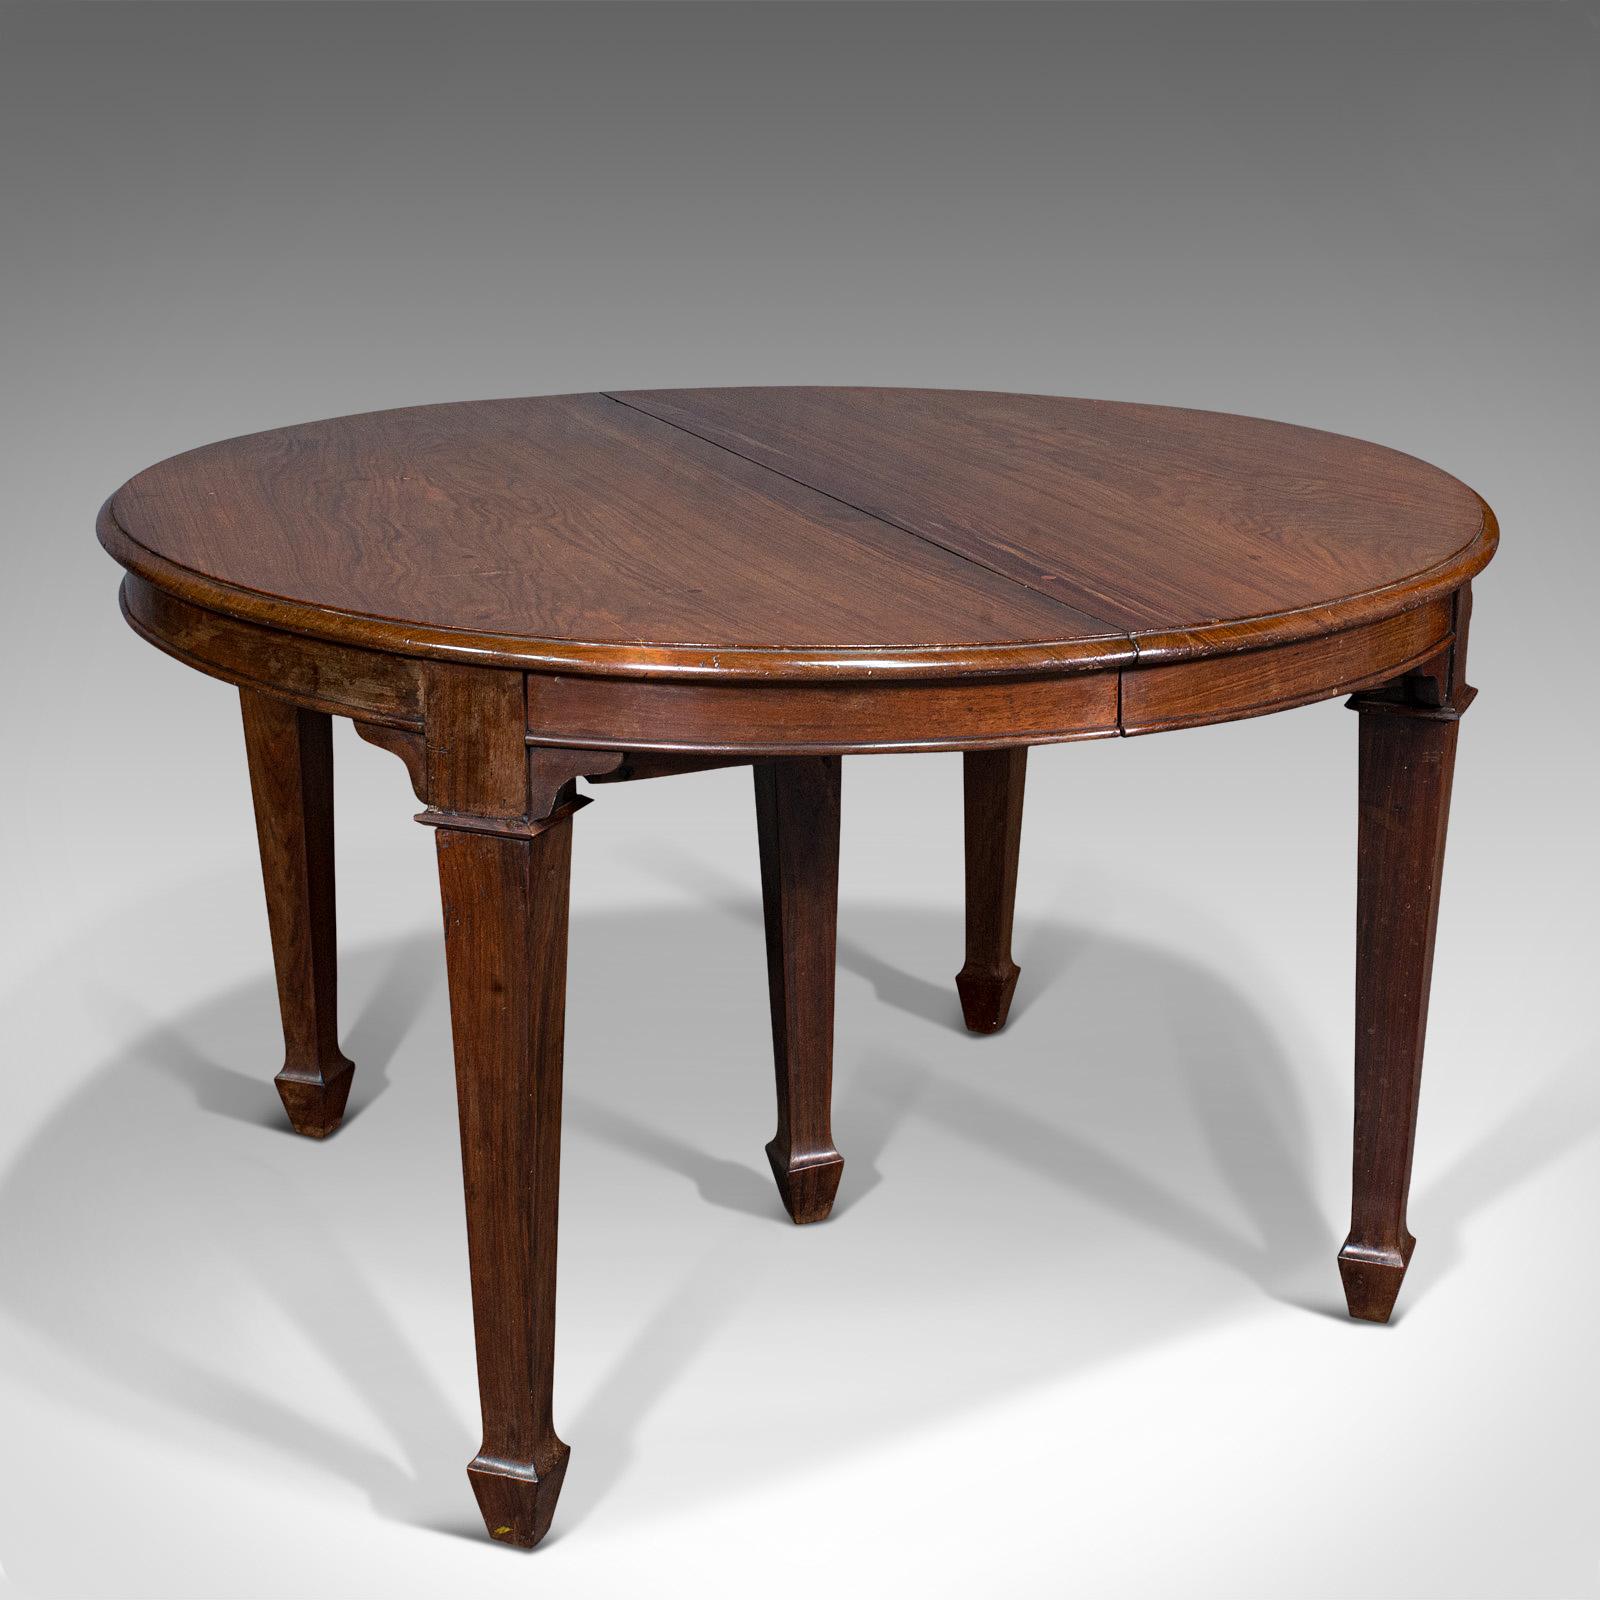 This is an antique colonial Campaign table. An Indian, solid rosewood dining table with leaf extension, dating to the Victorian Empire, circa 1890.

Delightful example of a Campaign dining table – a truly rare and interesting piece
Displays a